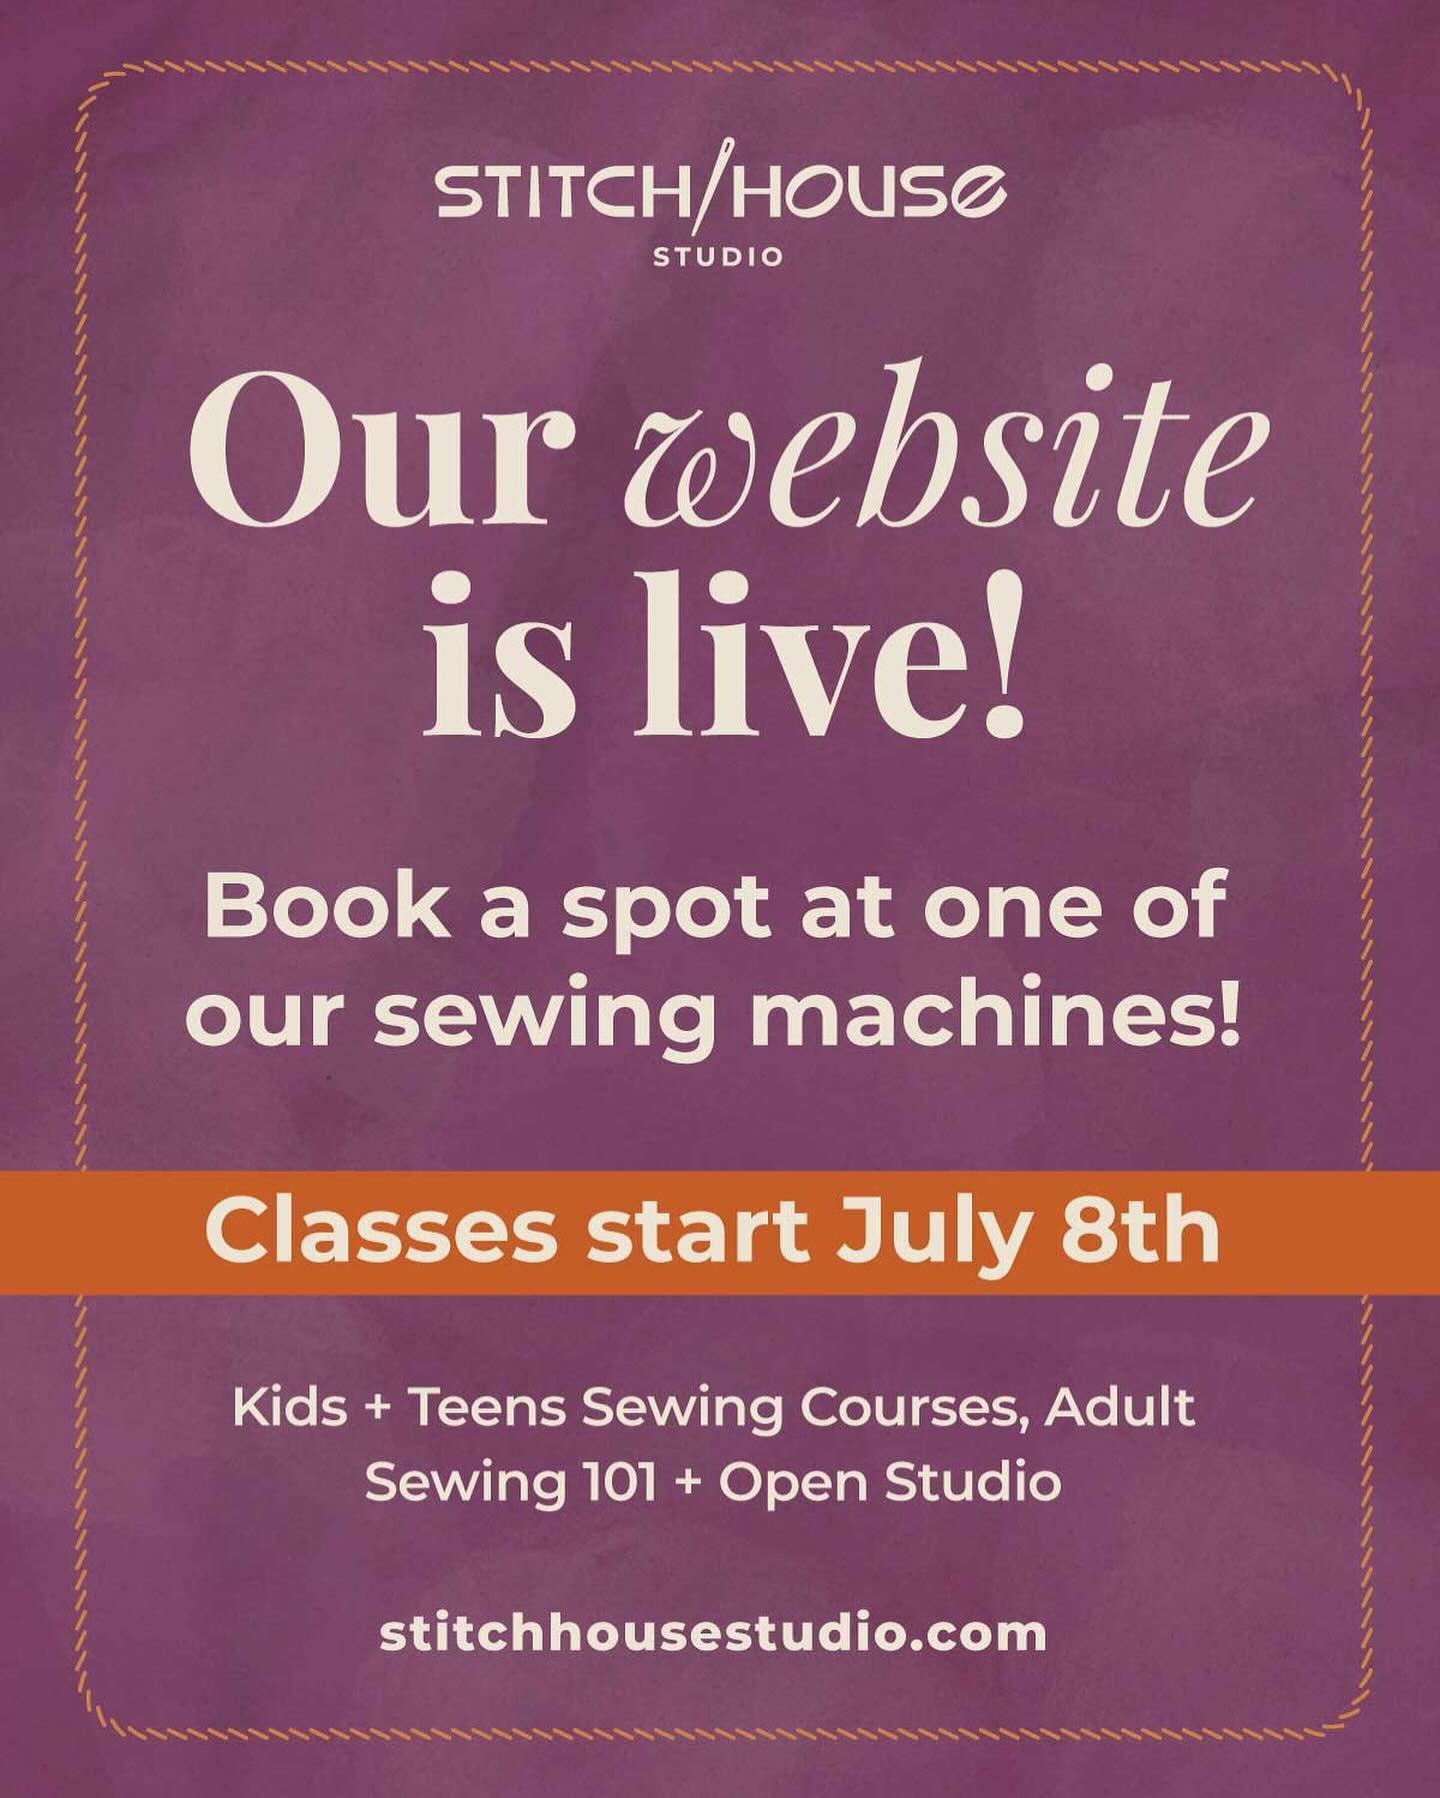 The day is finally here and we are excited to be able to share our website with you! Visit our website stitchhousestudio.com to see our kids and teens courses, adult sewing 101 class, and adult open studio! See you when our doors open July 8th!✂️🪡🧵